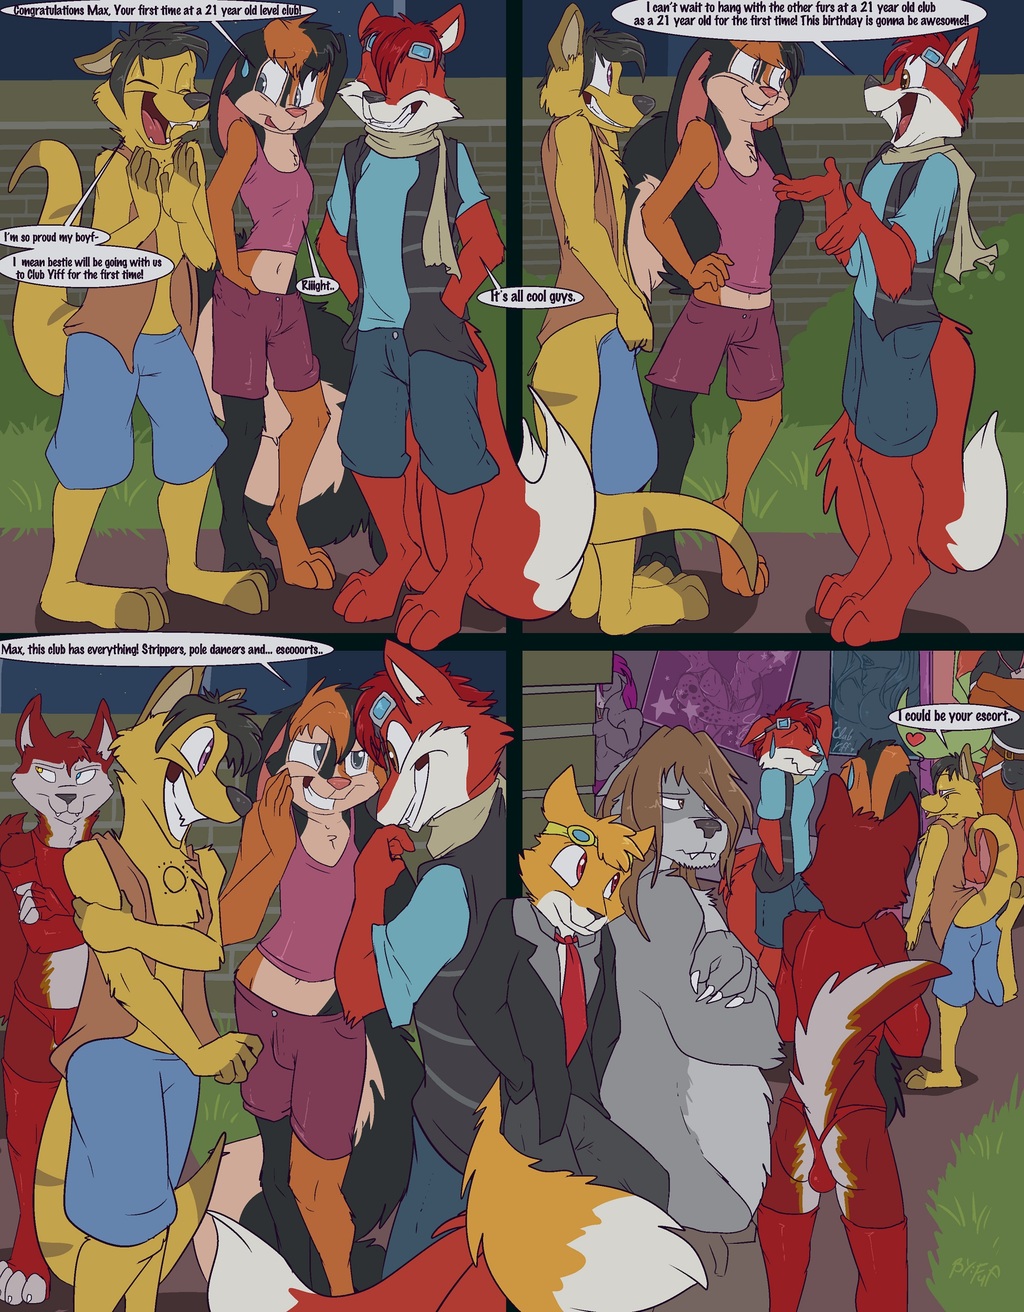 Party at Club Yiff: PG1